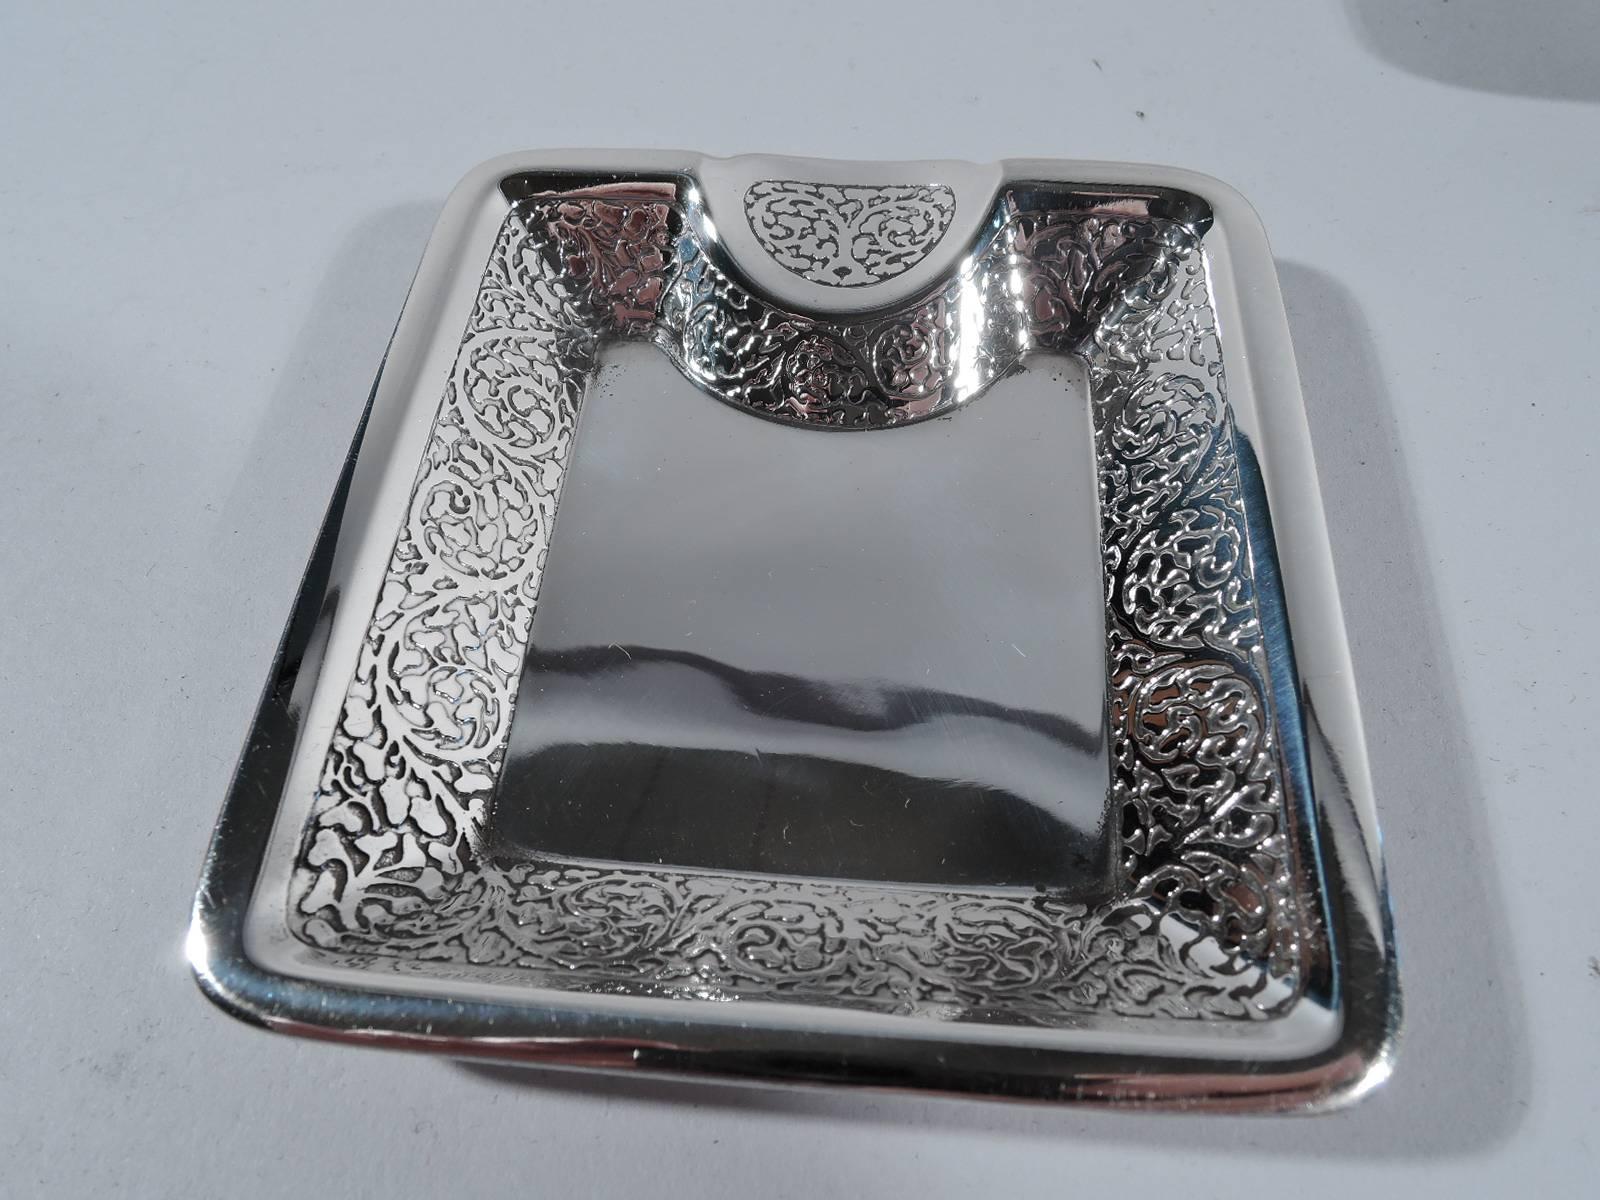 American Antique Tiffany Sterling Silver Smoking Set with Lighter and Ashtrays